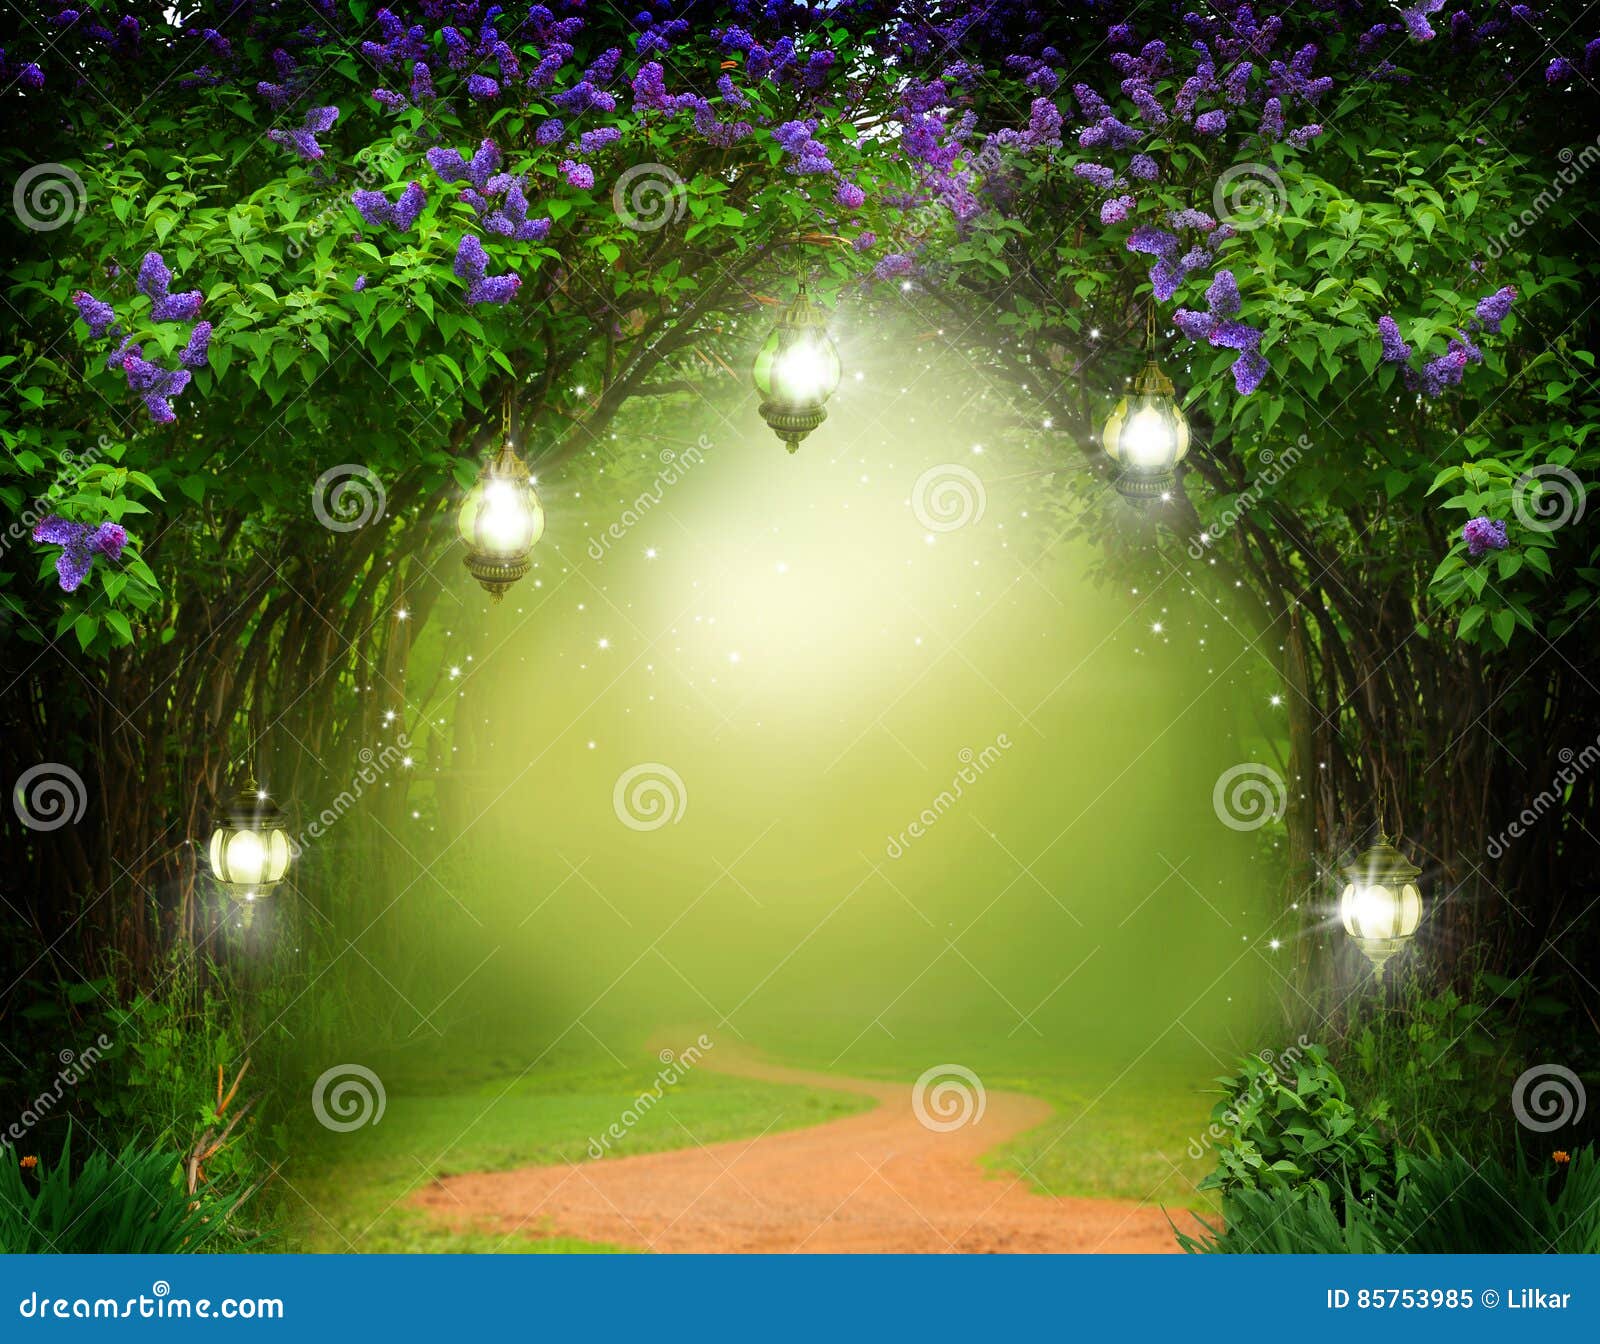 fantasy background . magic forest with road.